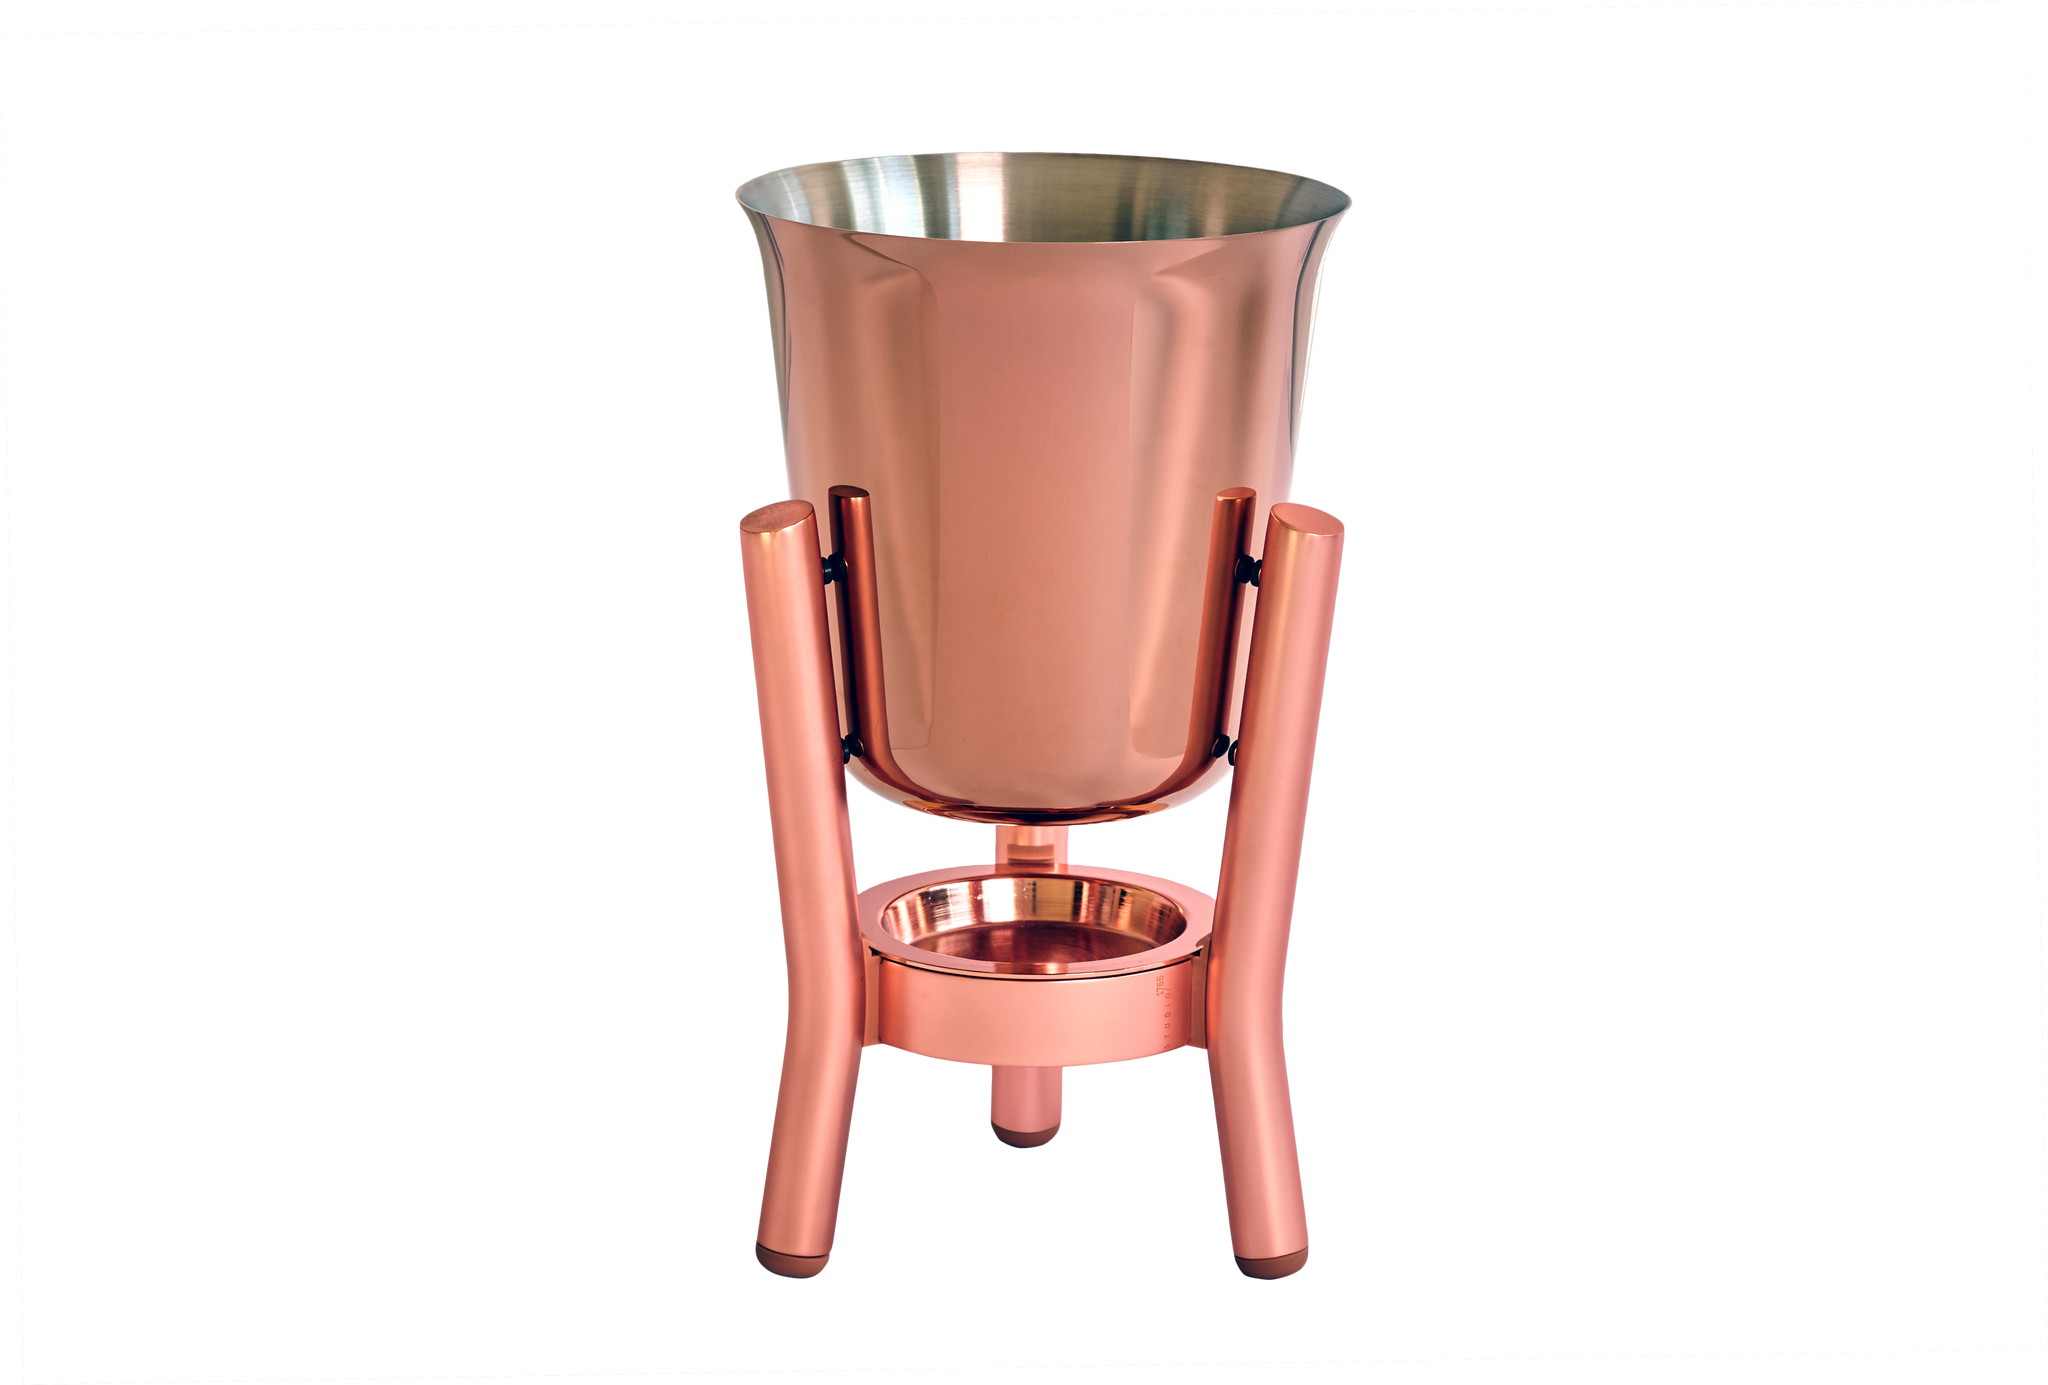 PVD Copper coated Stainless Steel Champagne Cooler with Copper Stand